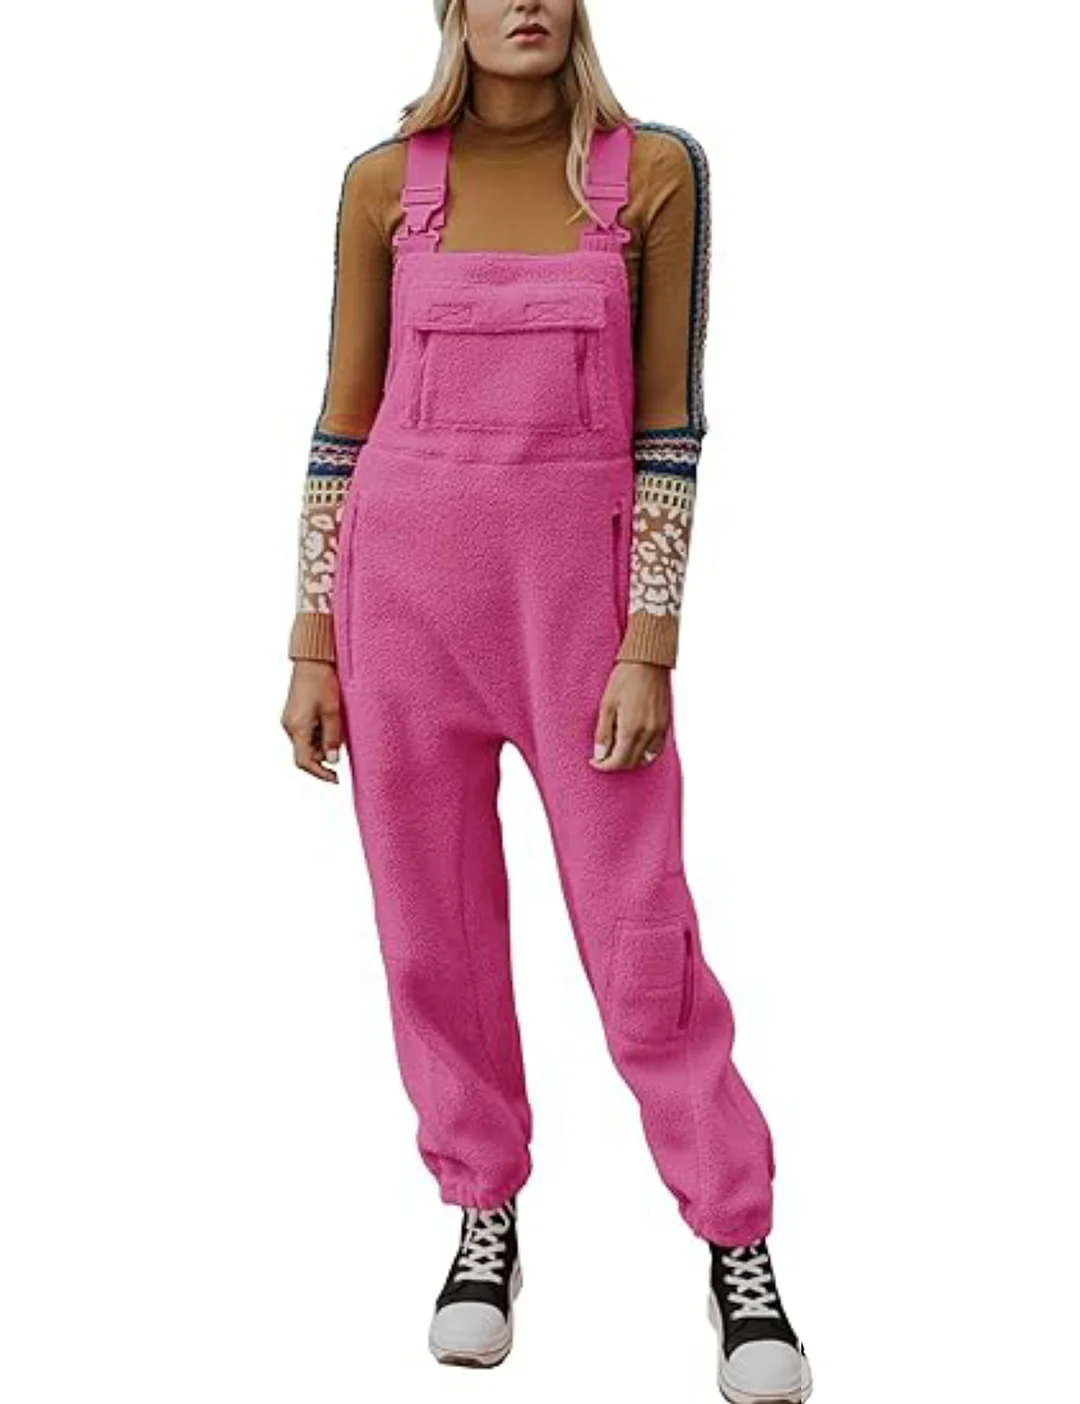 Women's Fleece Warm Overalls Loose Casual Jumpsuits (Buy 2 Free Shipping)